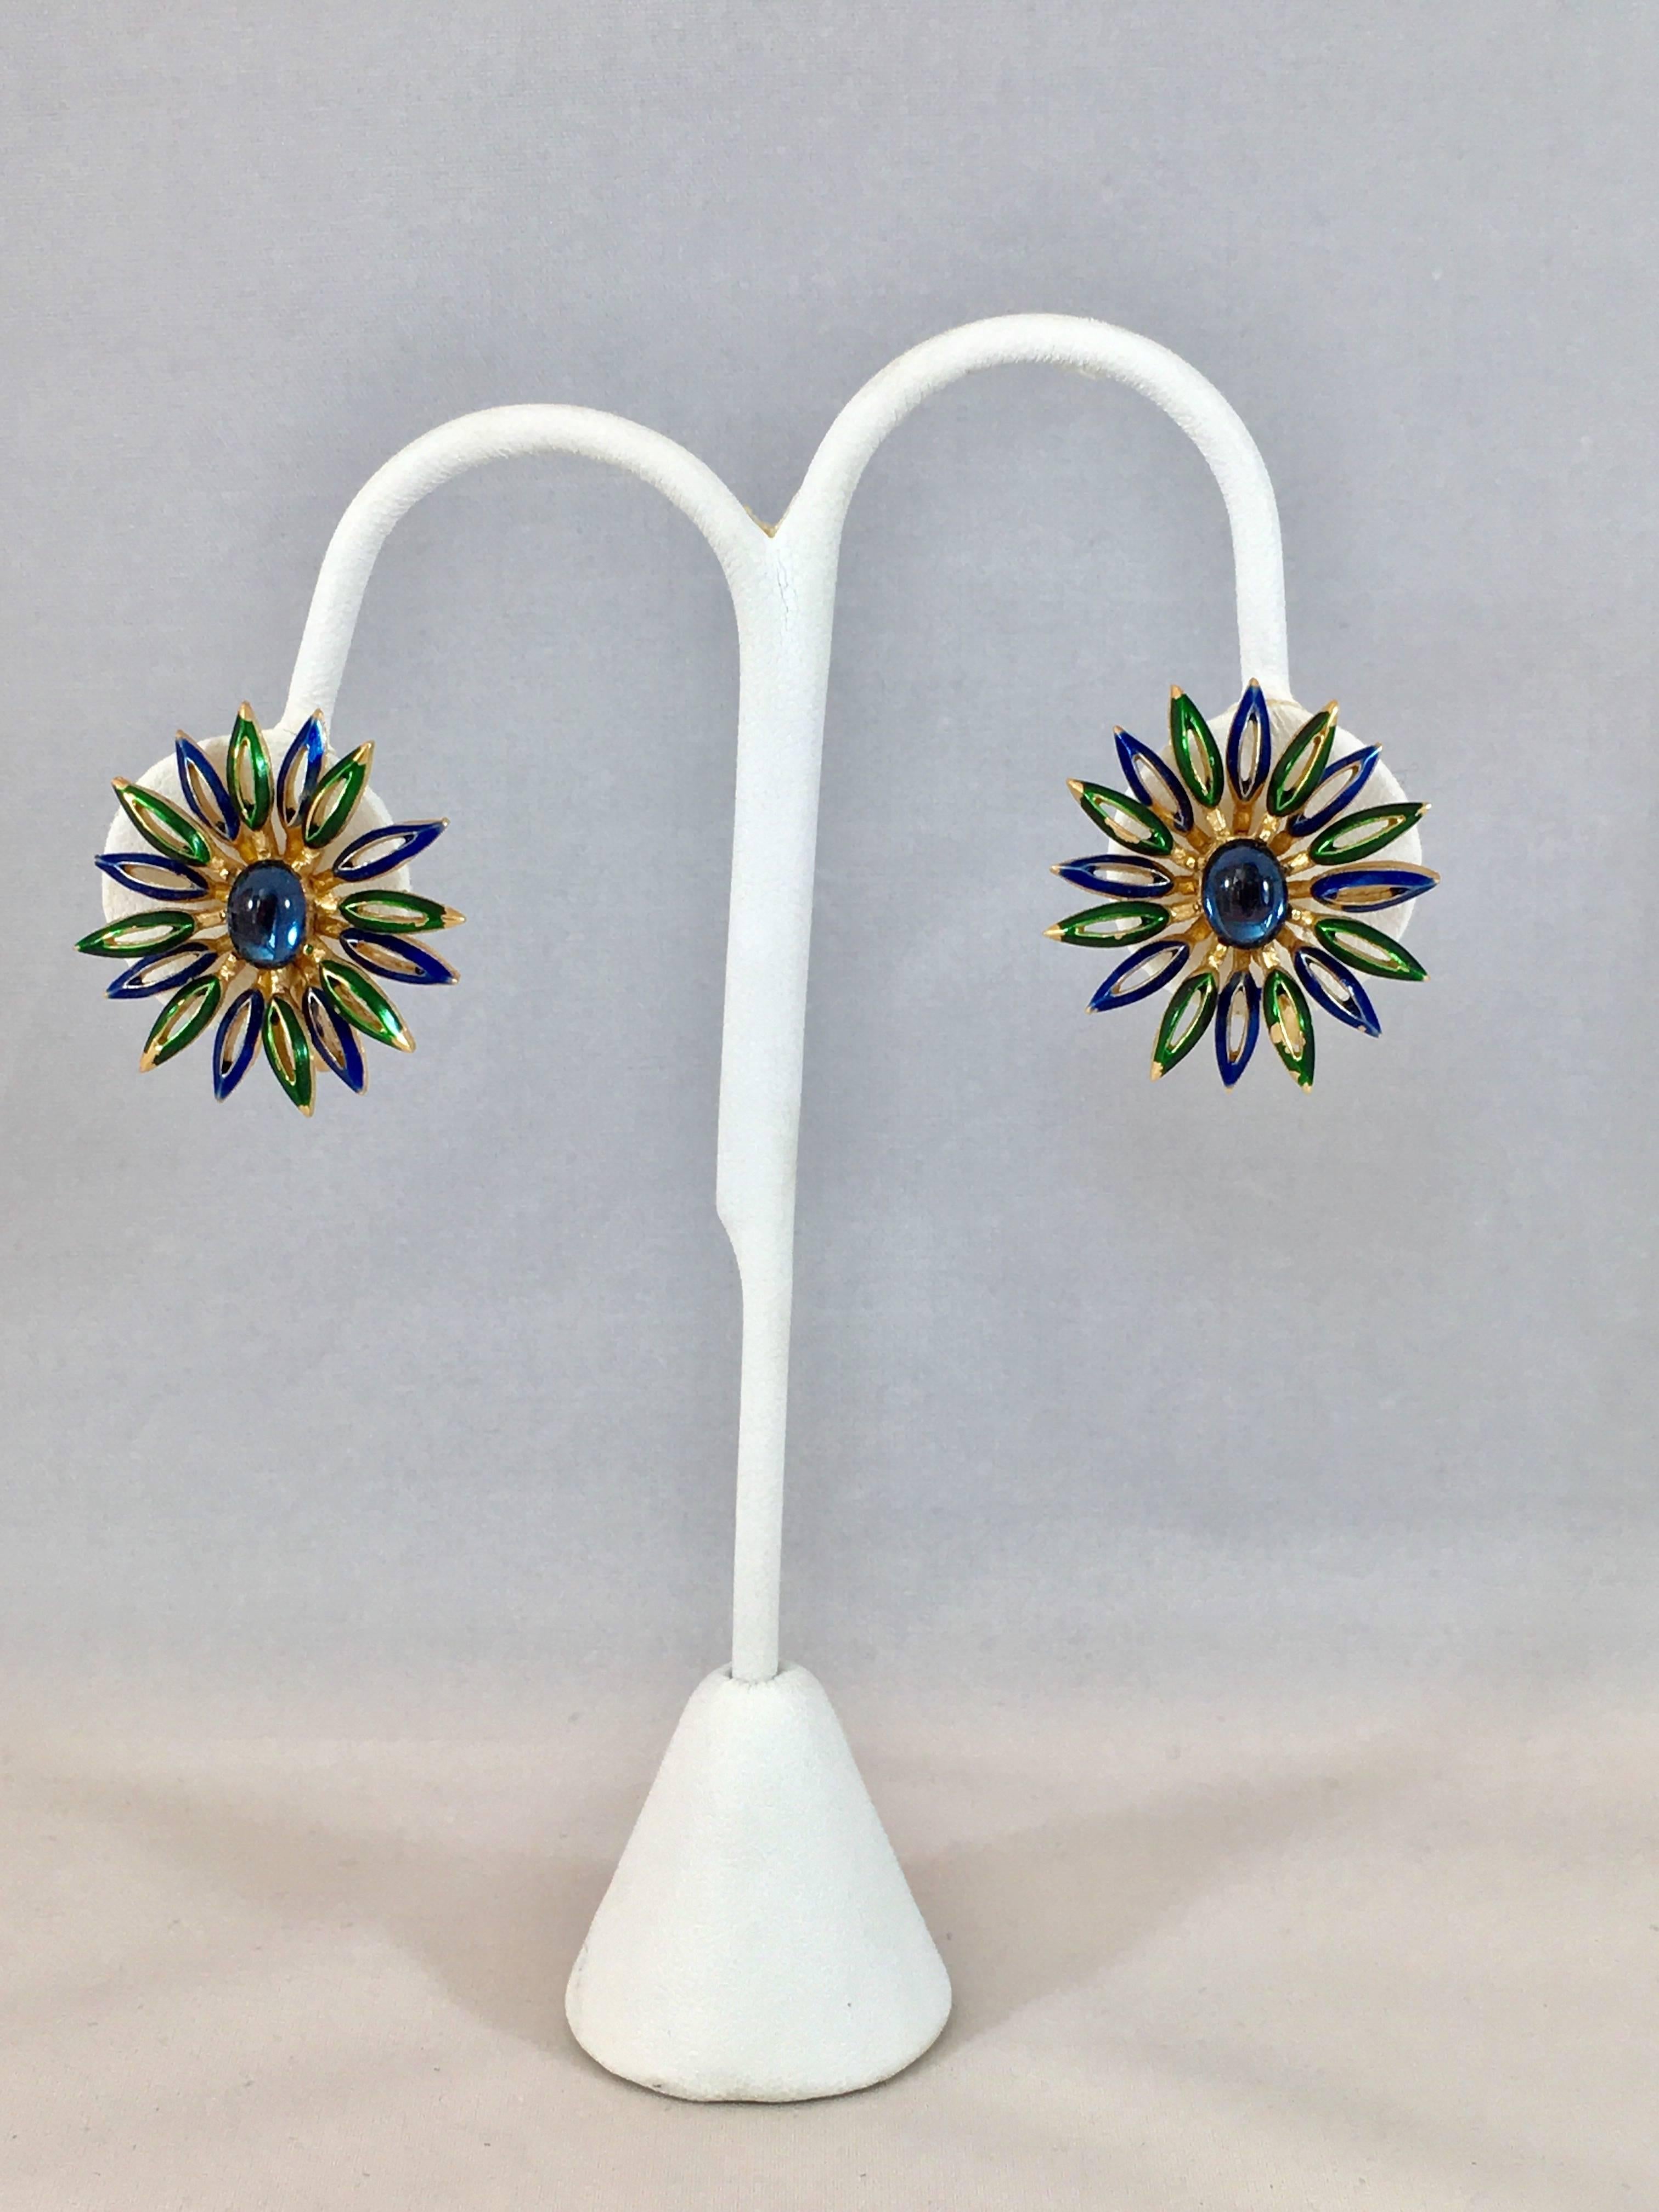 1960s Trifari Clip-on Flower Earrings  In Excellent Condition For Sale In Chicago, IL